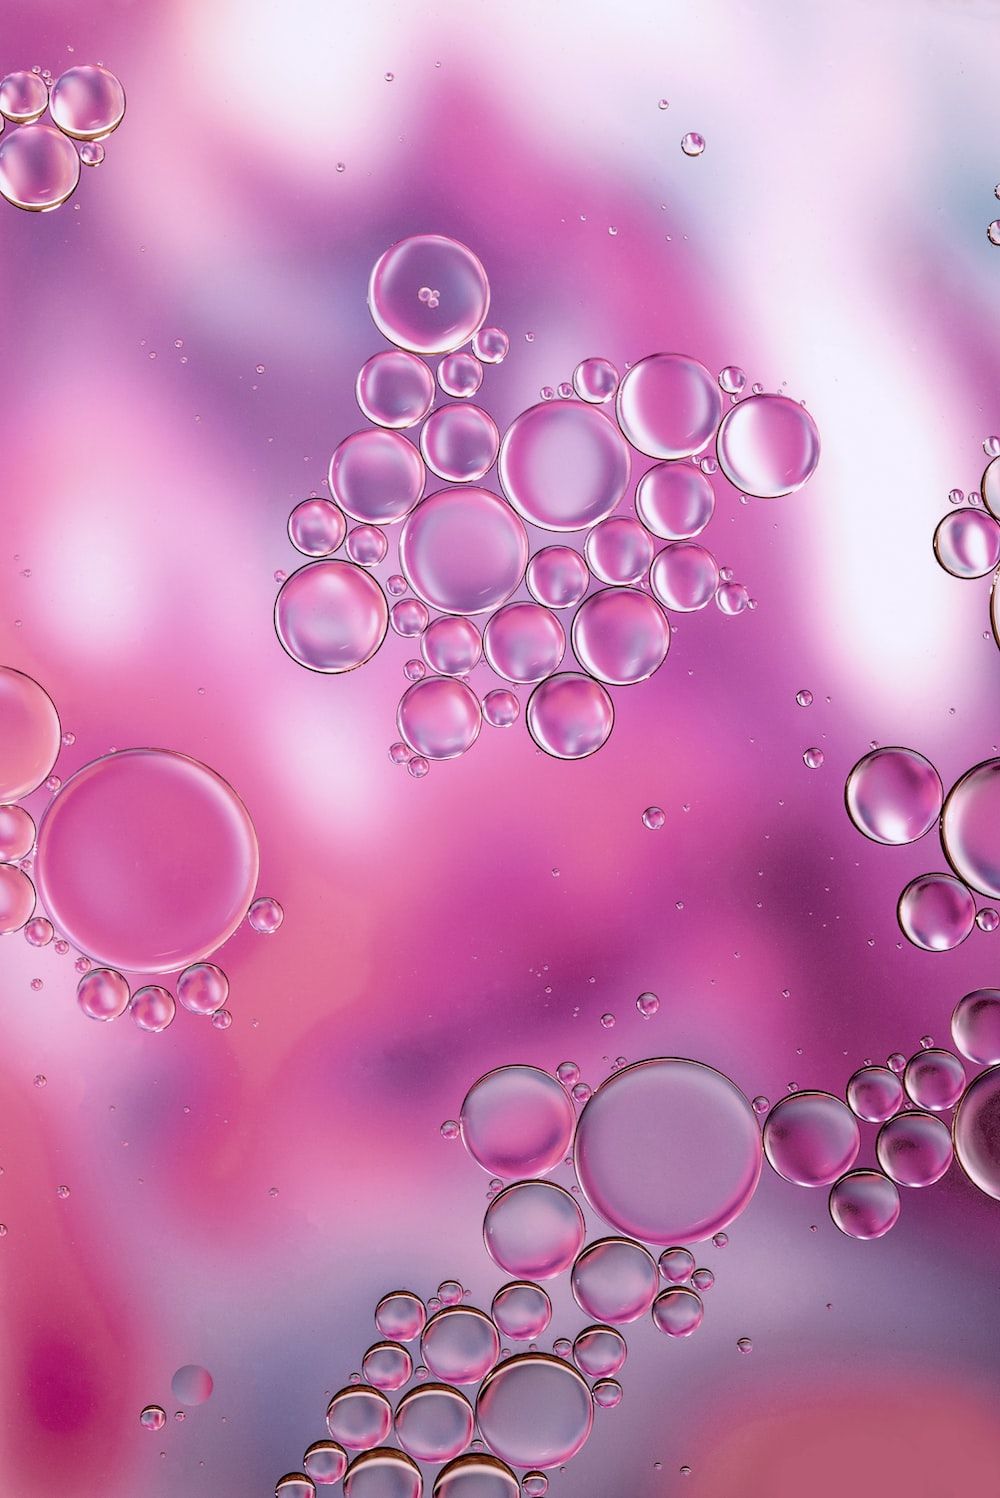 A close up of some bubbles in the water - Bubbles